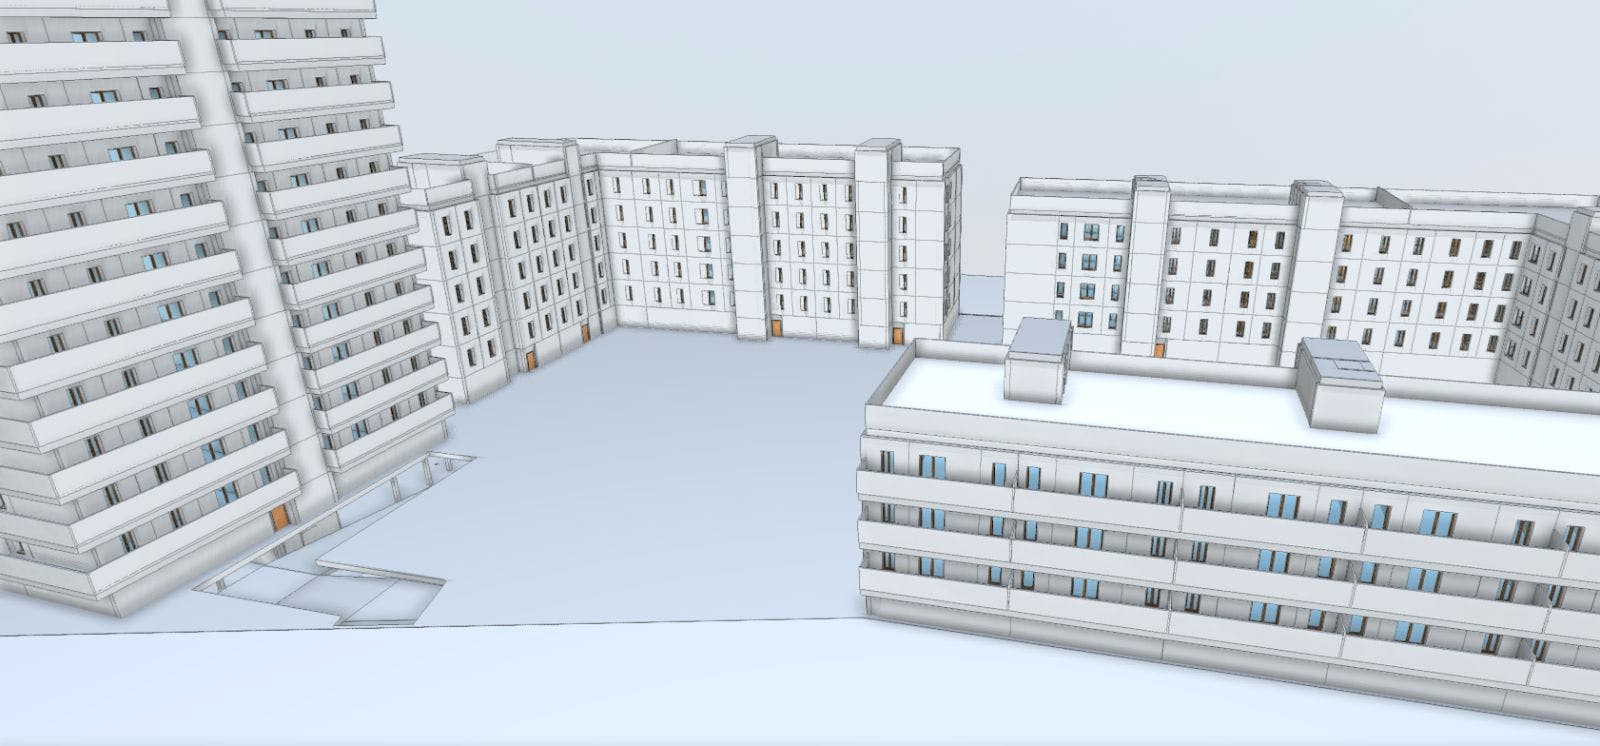 BIM exported from an ARCHITEChTURES project